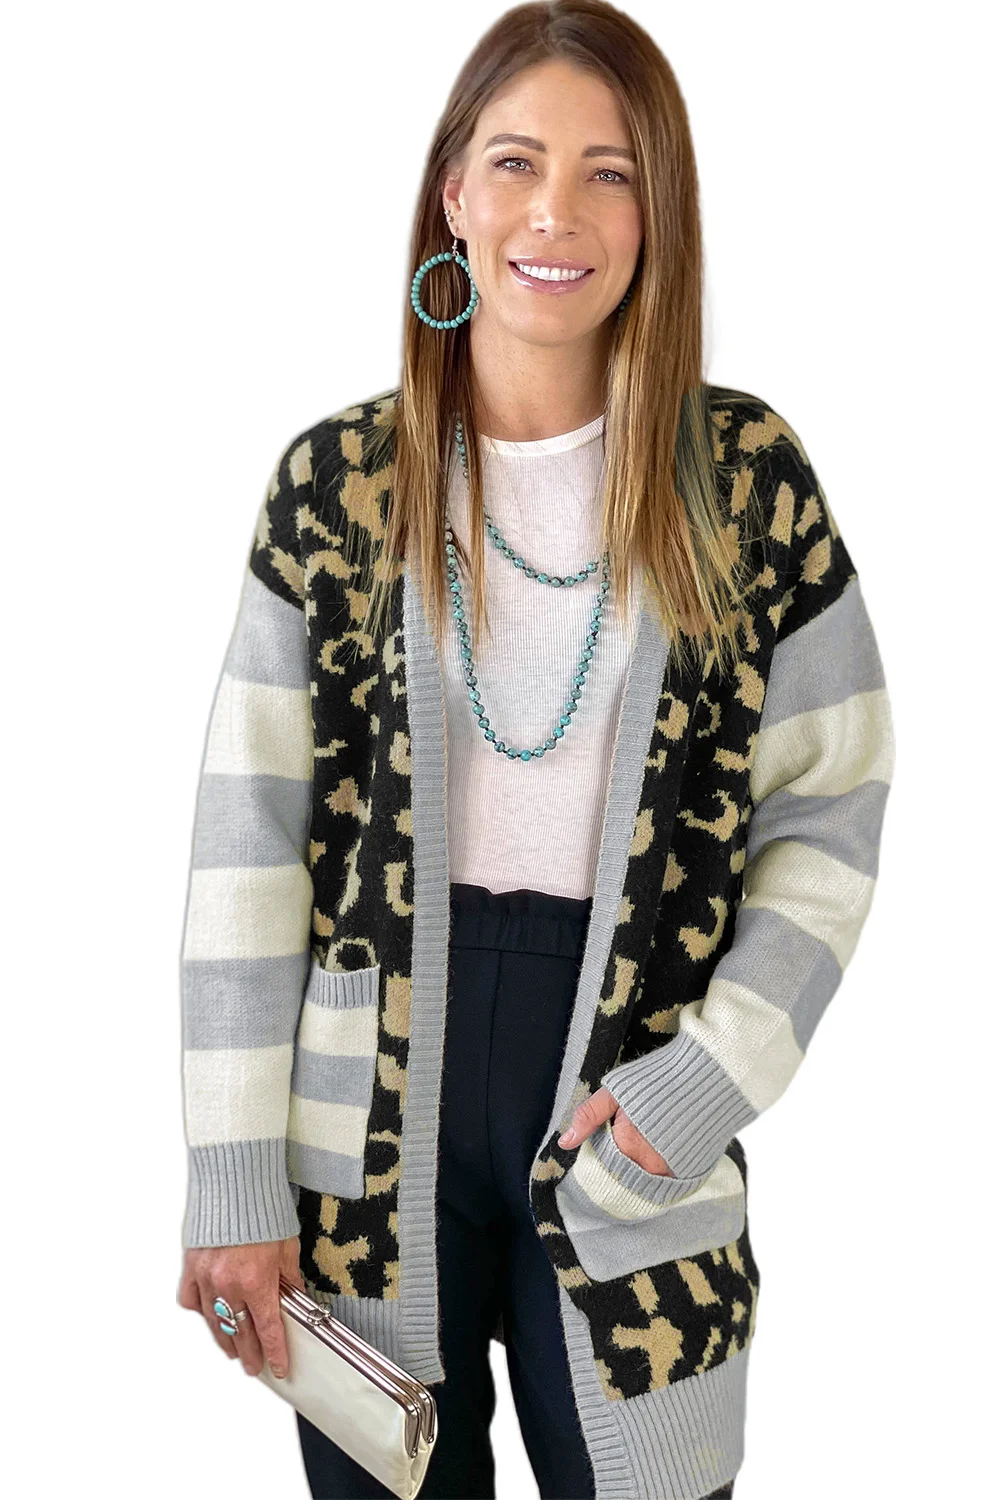 Leopard Print Cardigan with Striped Sleeve